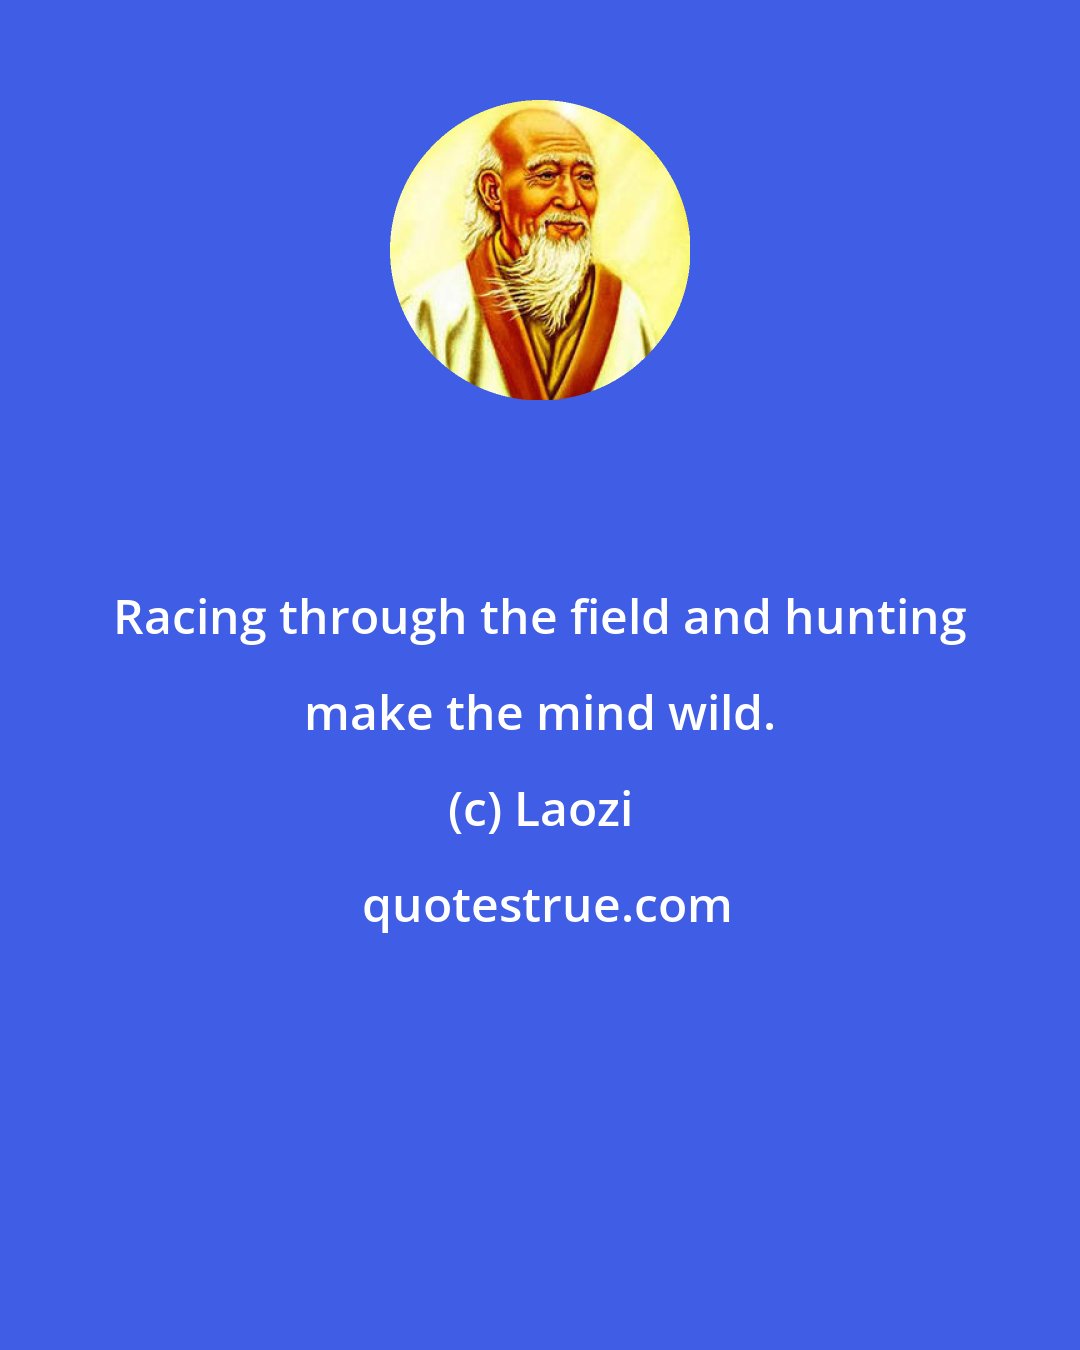 Laozi: Racing through the field and hunting make the mind wild.